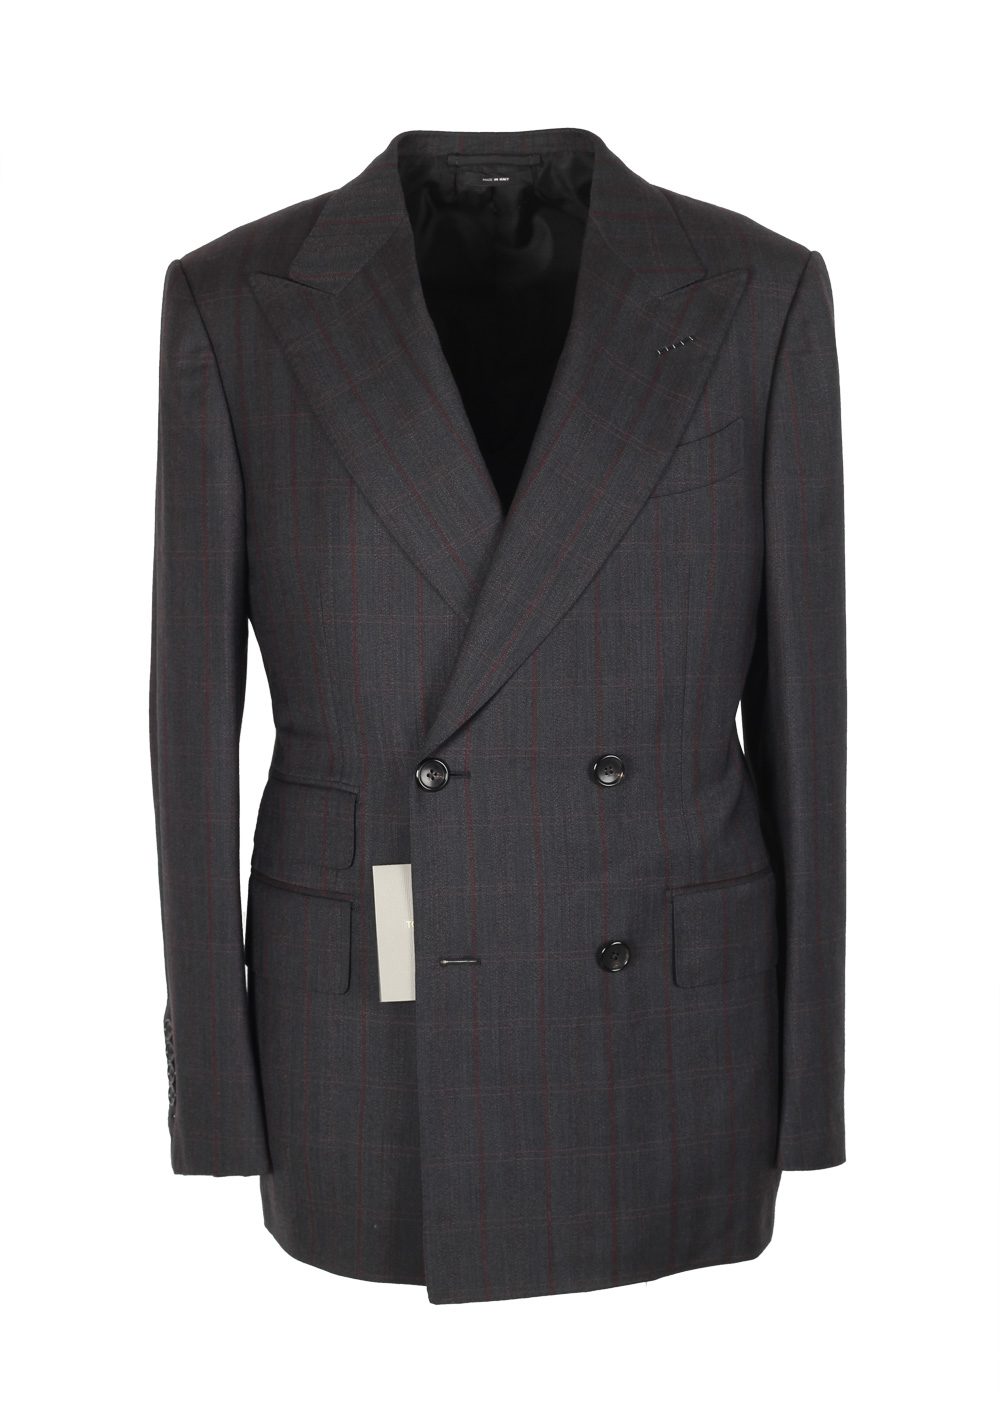 TOM FORD Shelton Double Breasted Checked Gray Suit Size 46 / 36R U.S ...